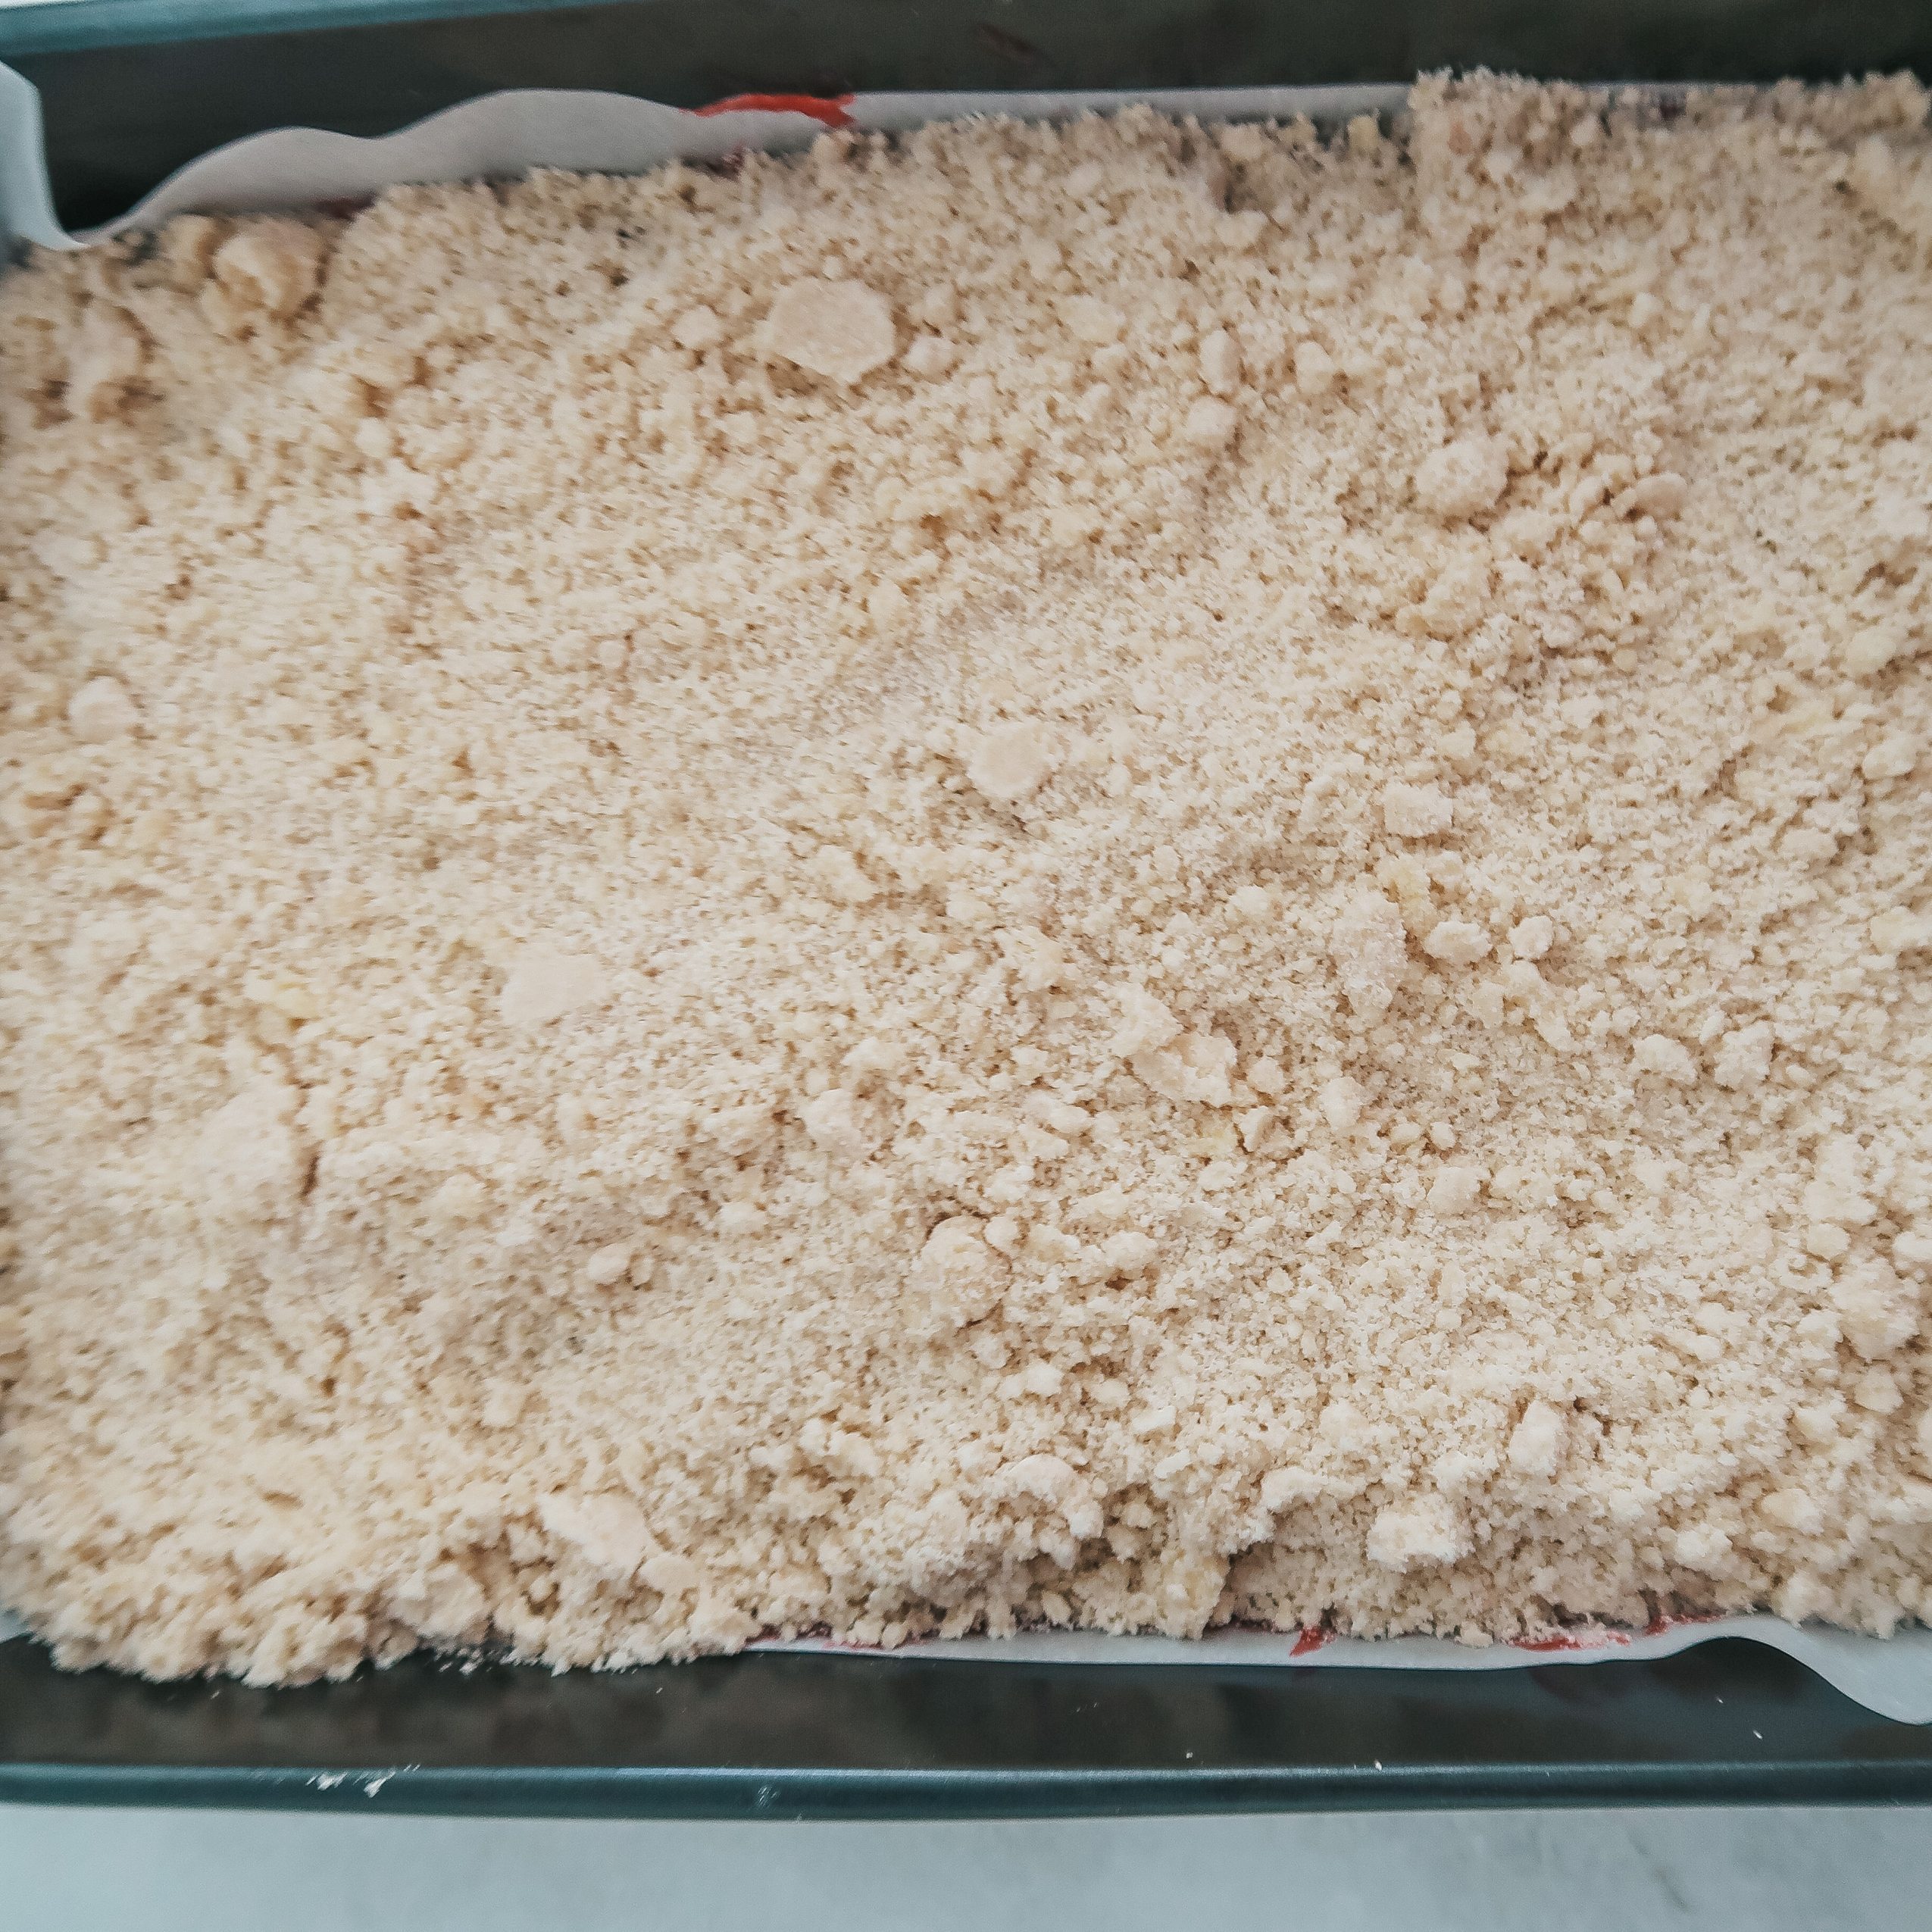 Add the rest of the crumble dough on top